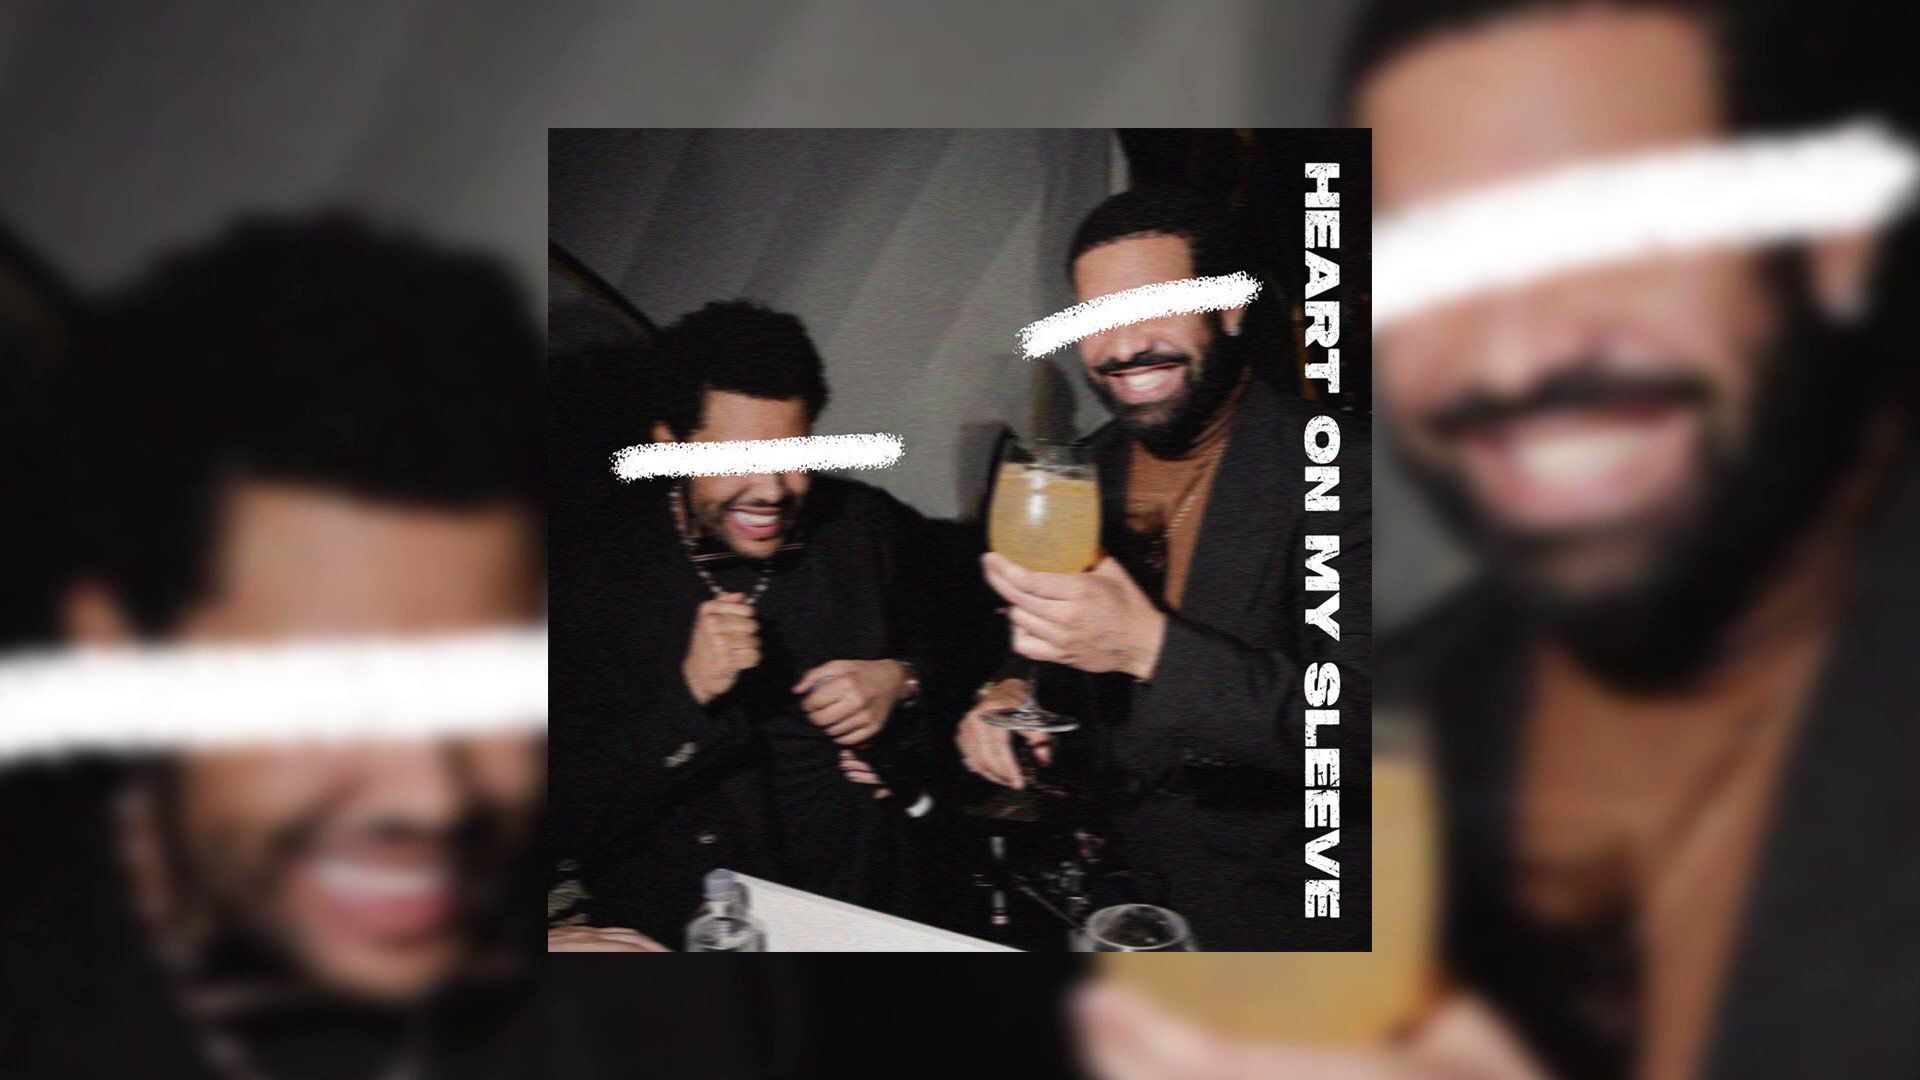 Viral AI-generated song with Drake and The Weeknd gets pulled from streaming platforms